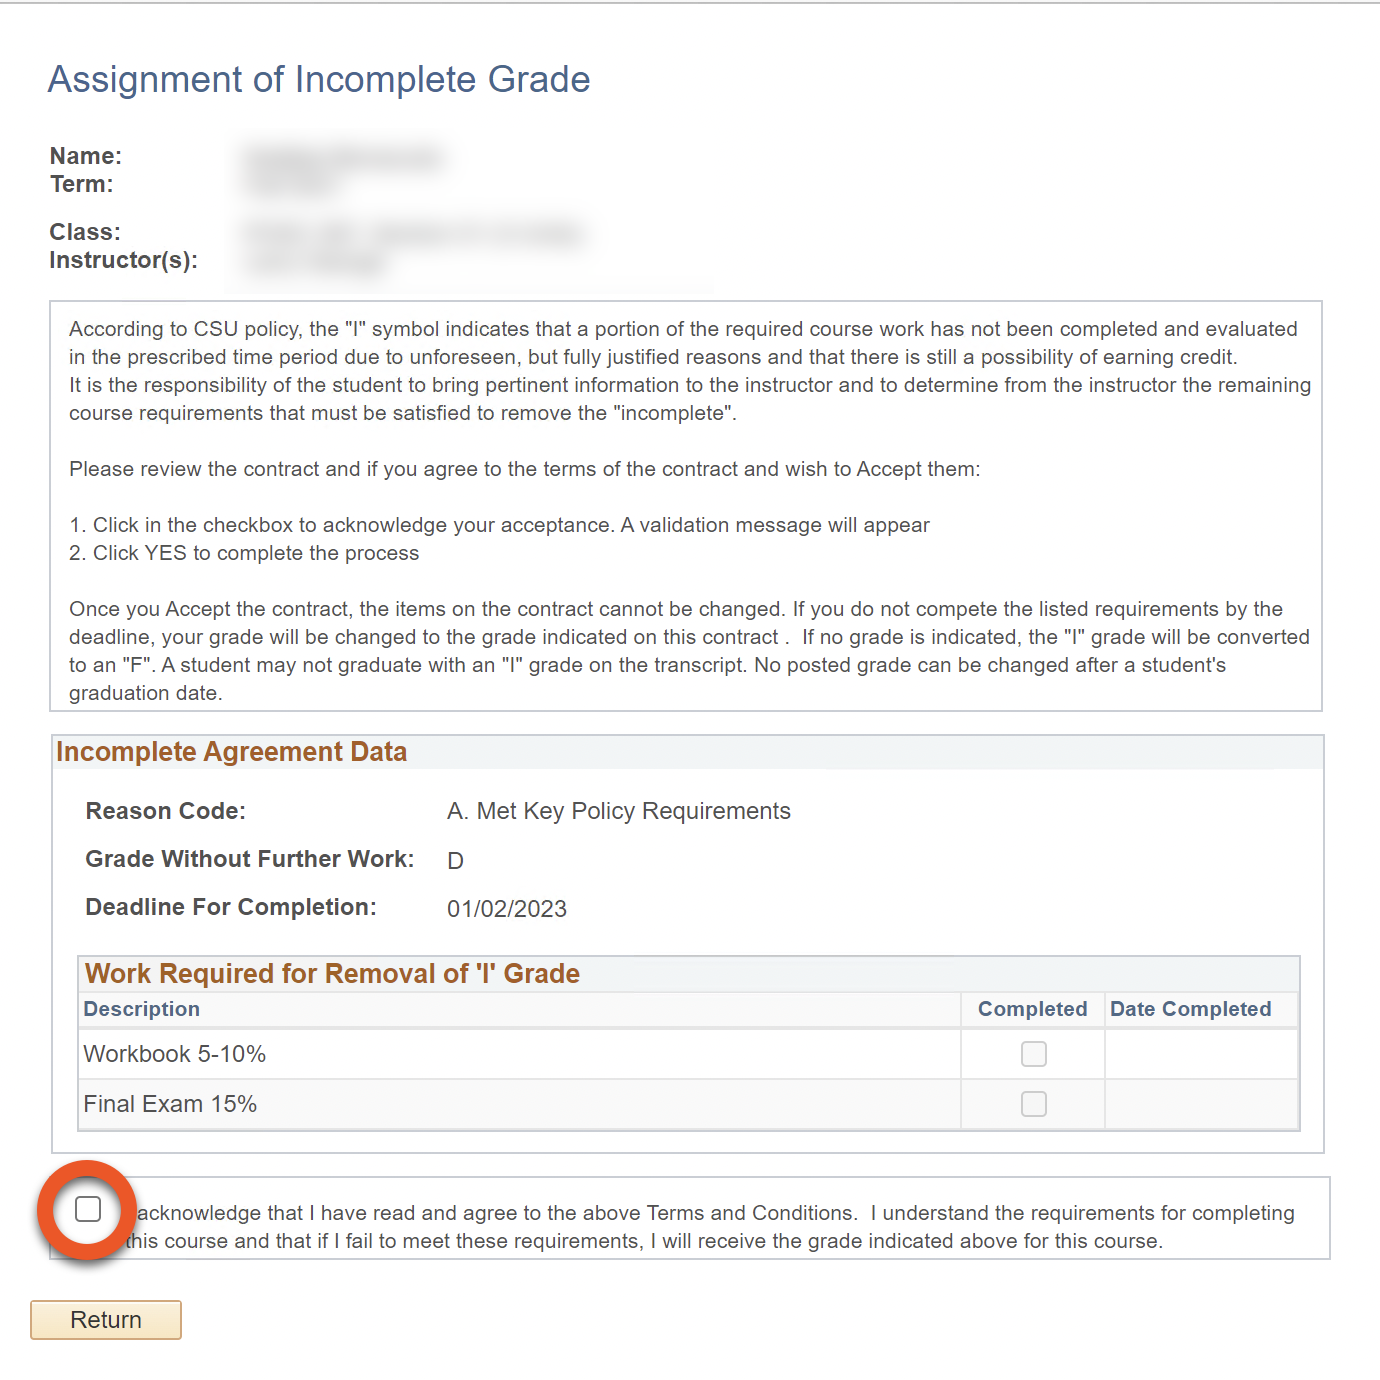 Incomplete Grade Agreement with checkbox for accepting the agreement